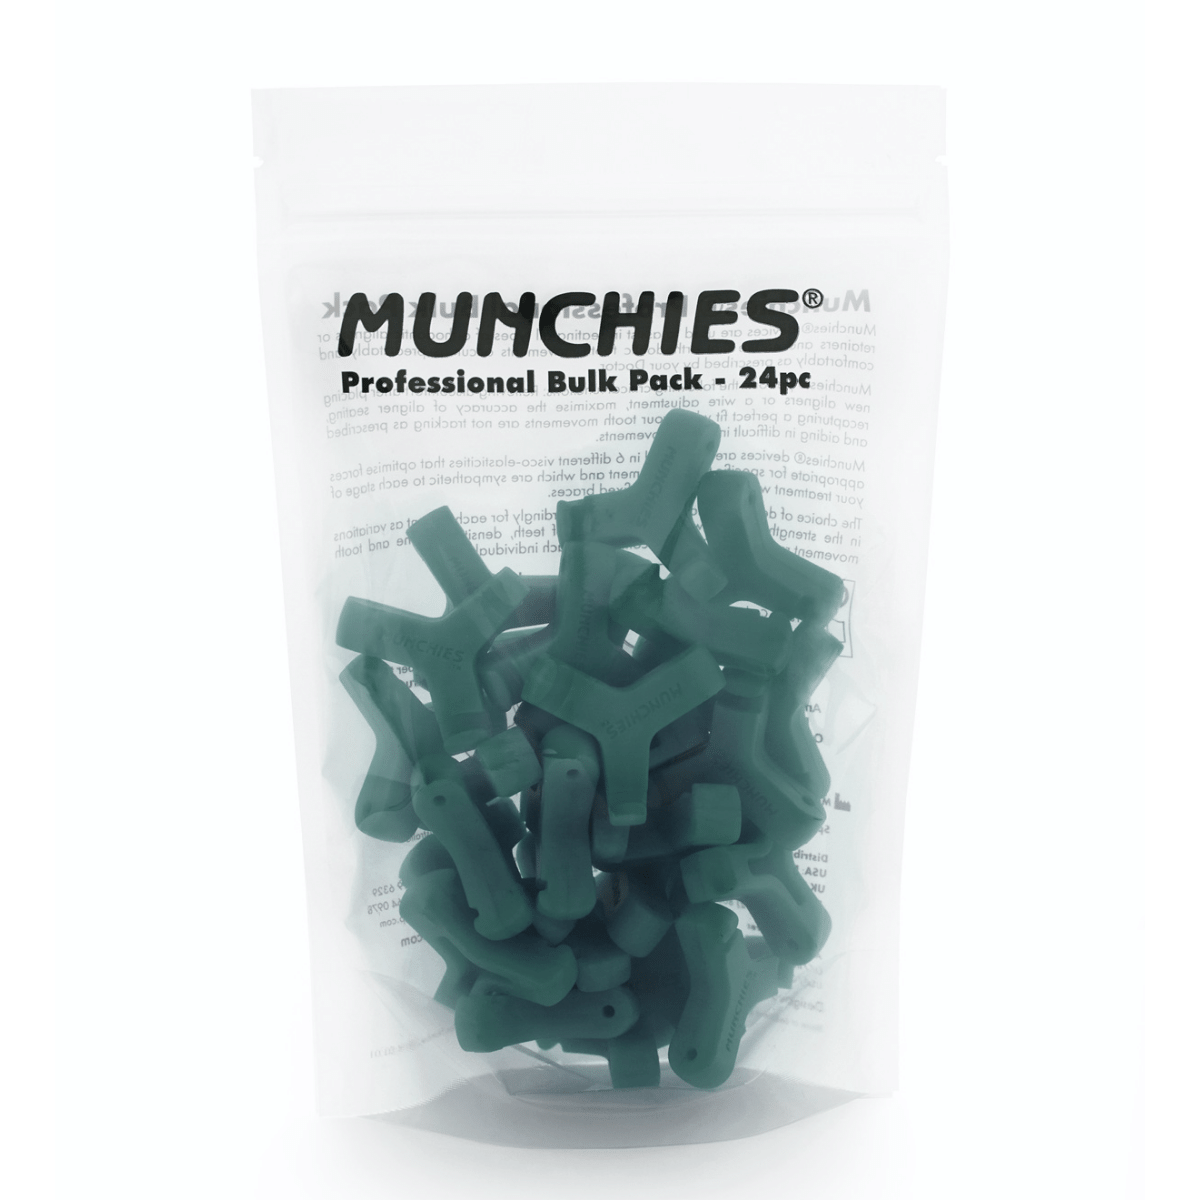 Munchies® Professional Bulk Pack (24 or 48 pieces)